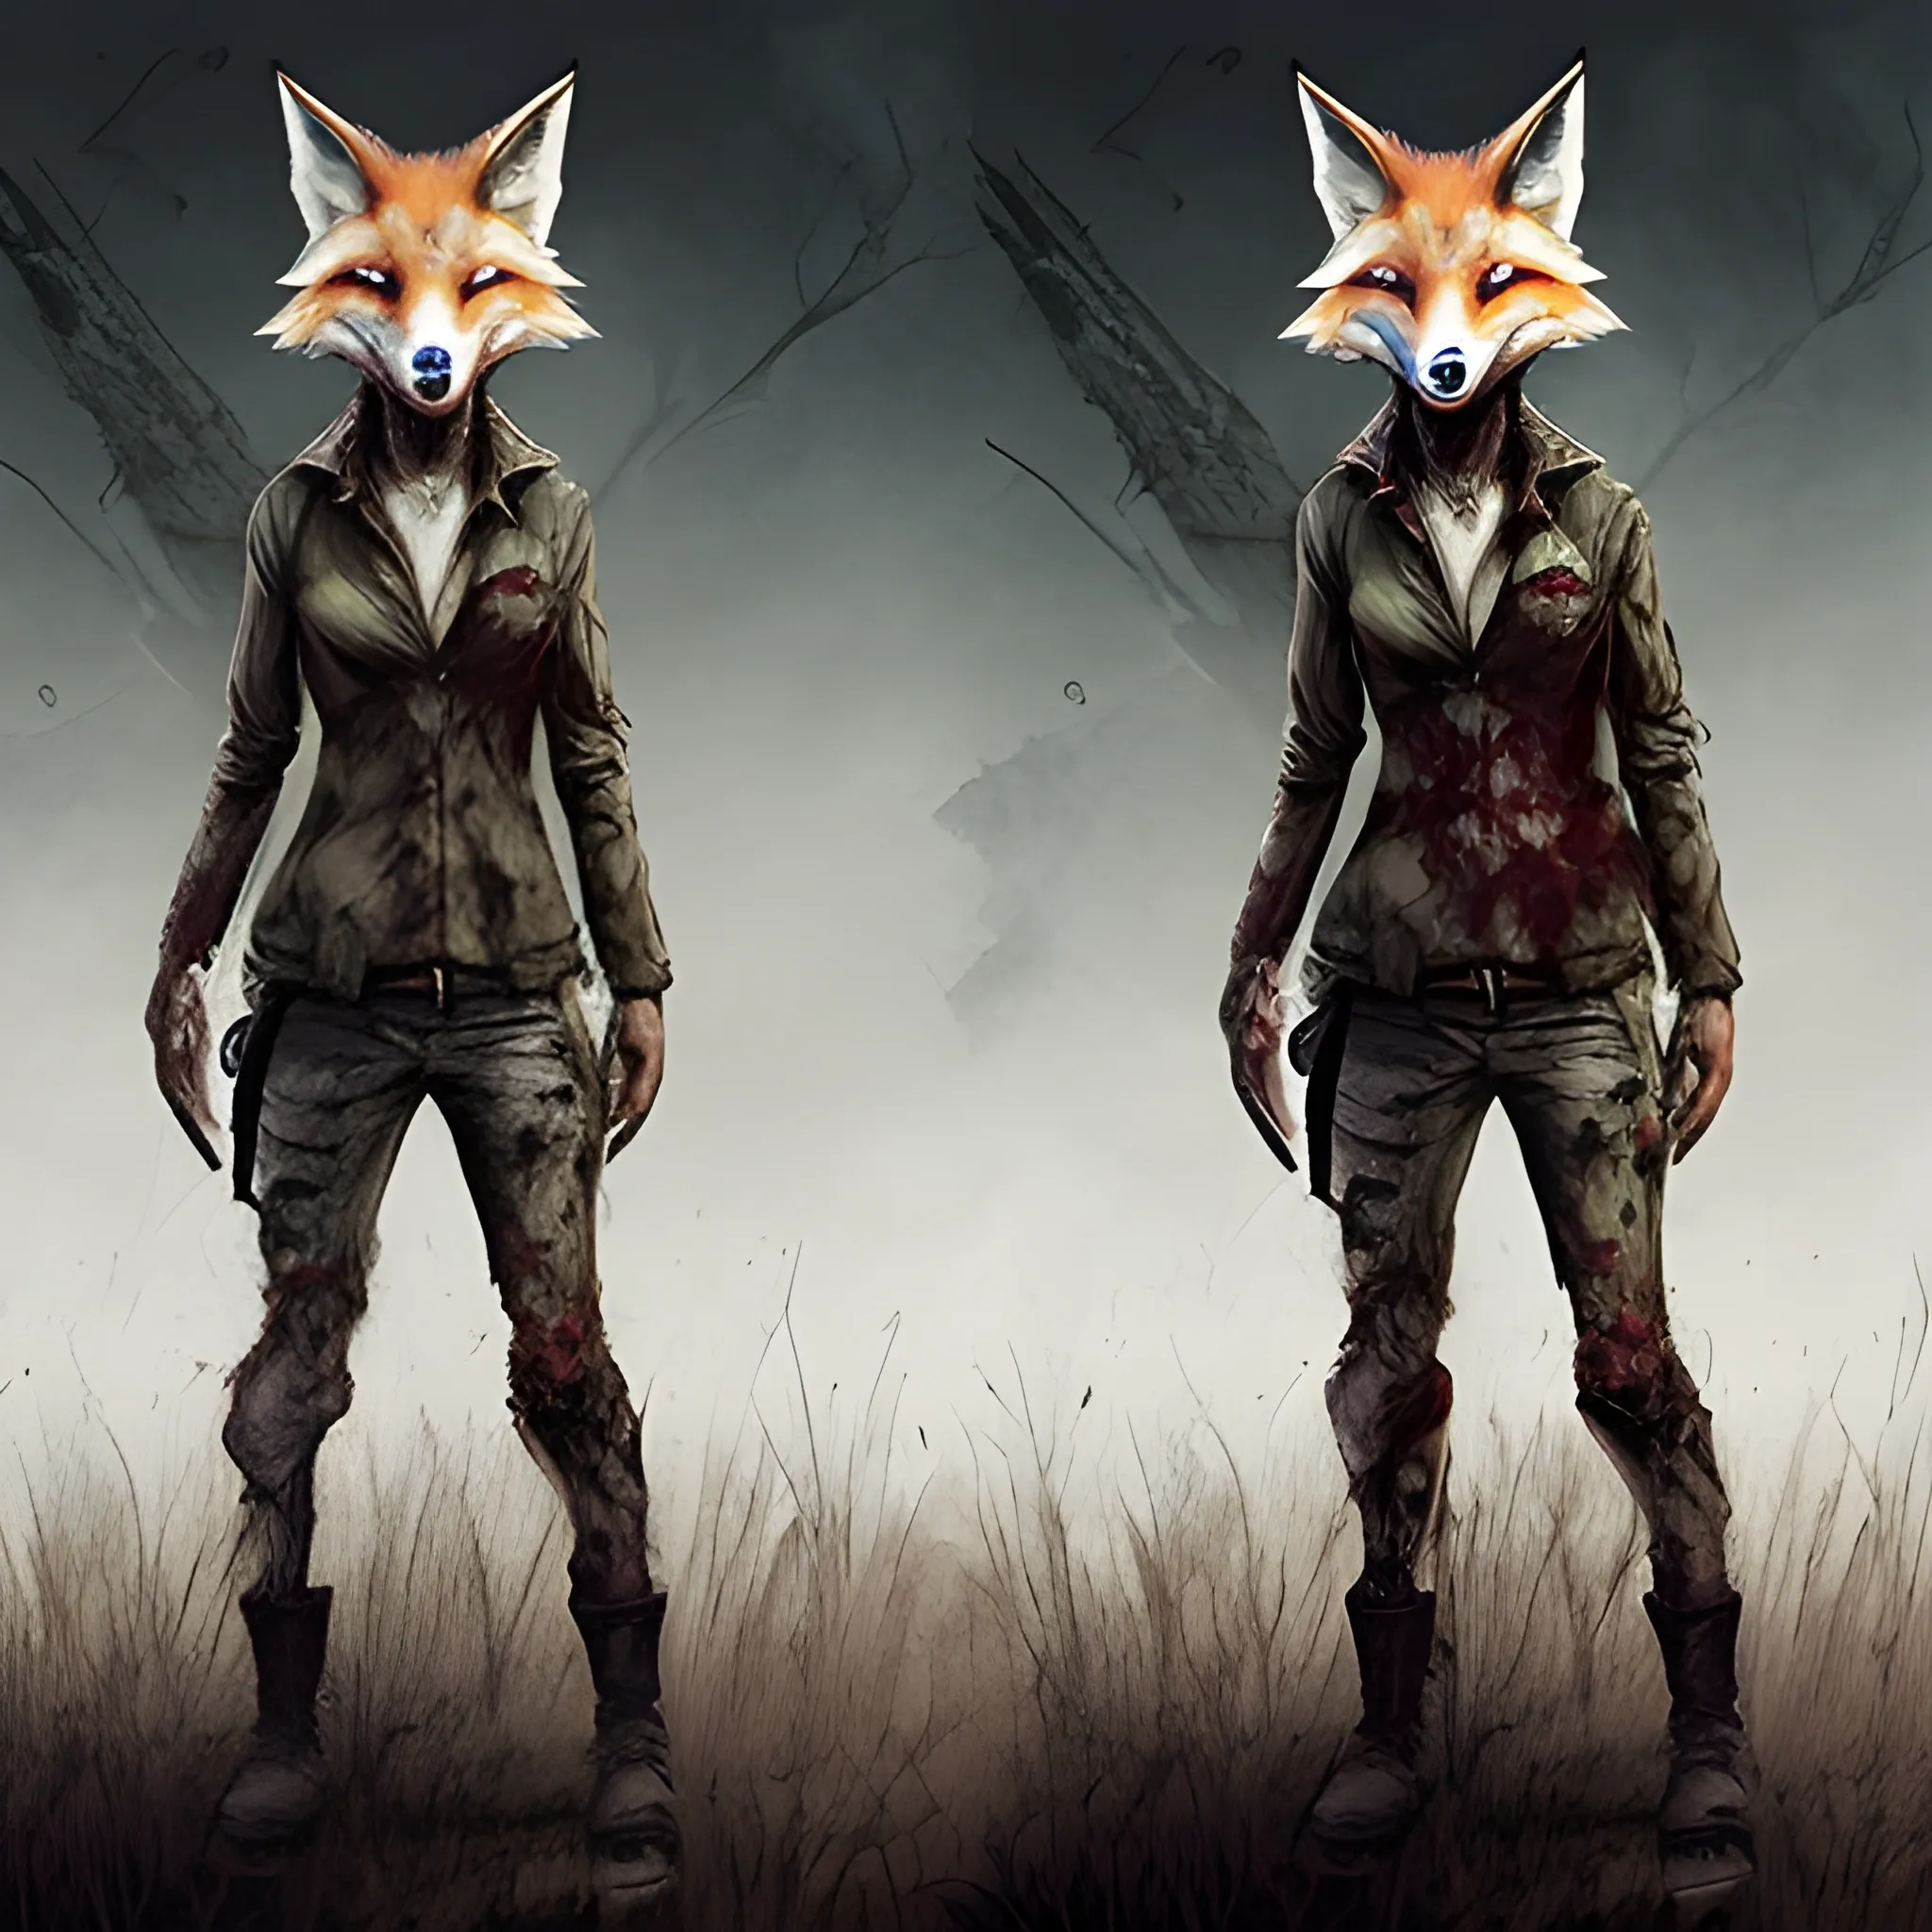 andromorphic fox in the future wearing zombie apocalypse cloths   